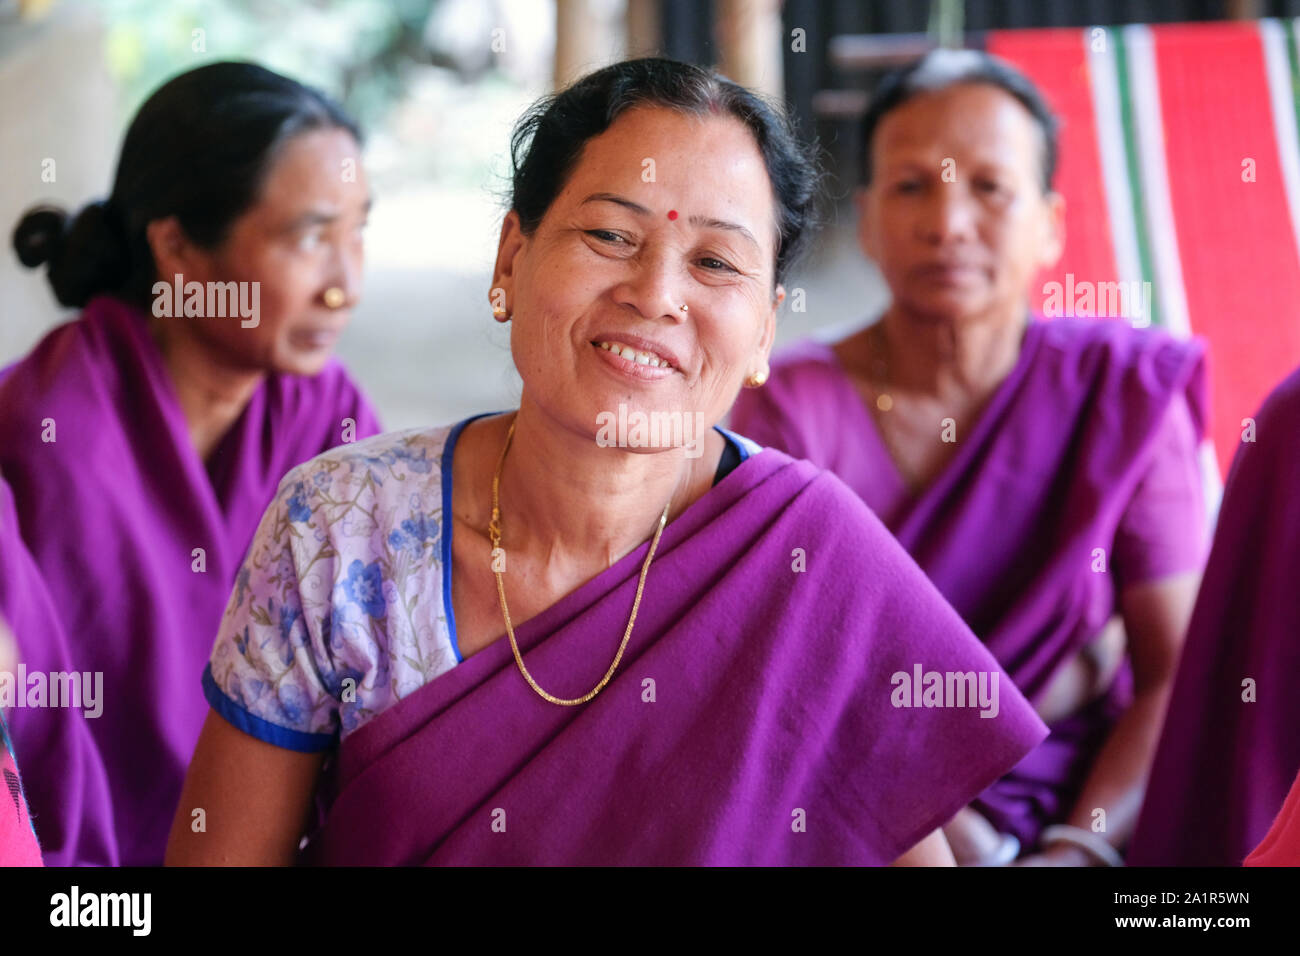 Women have formed a self-help group to be economically more independent. Village Bagbari, State of Tripura, Northeast India Stock Photo